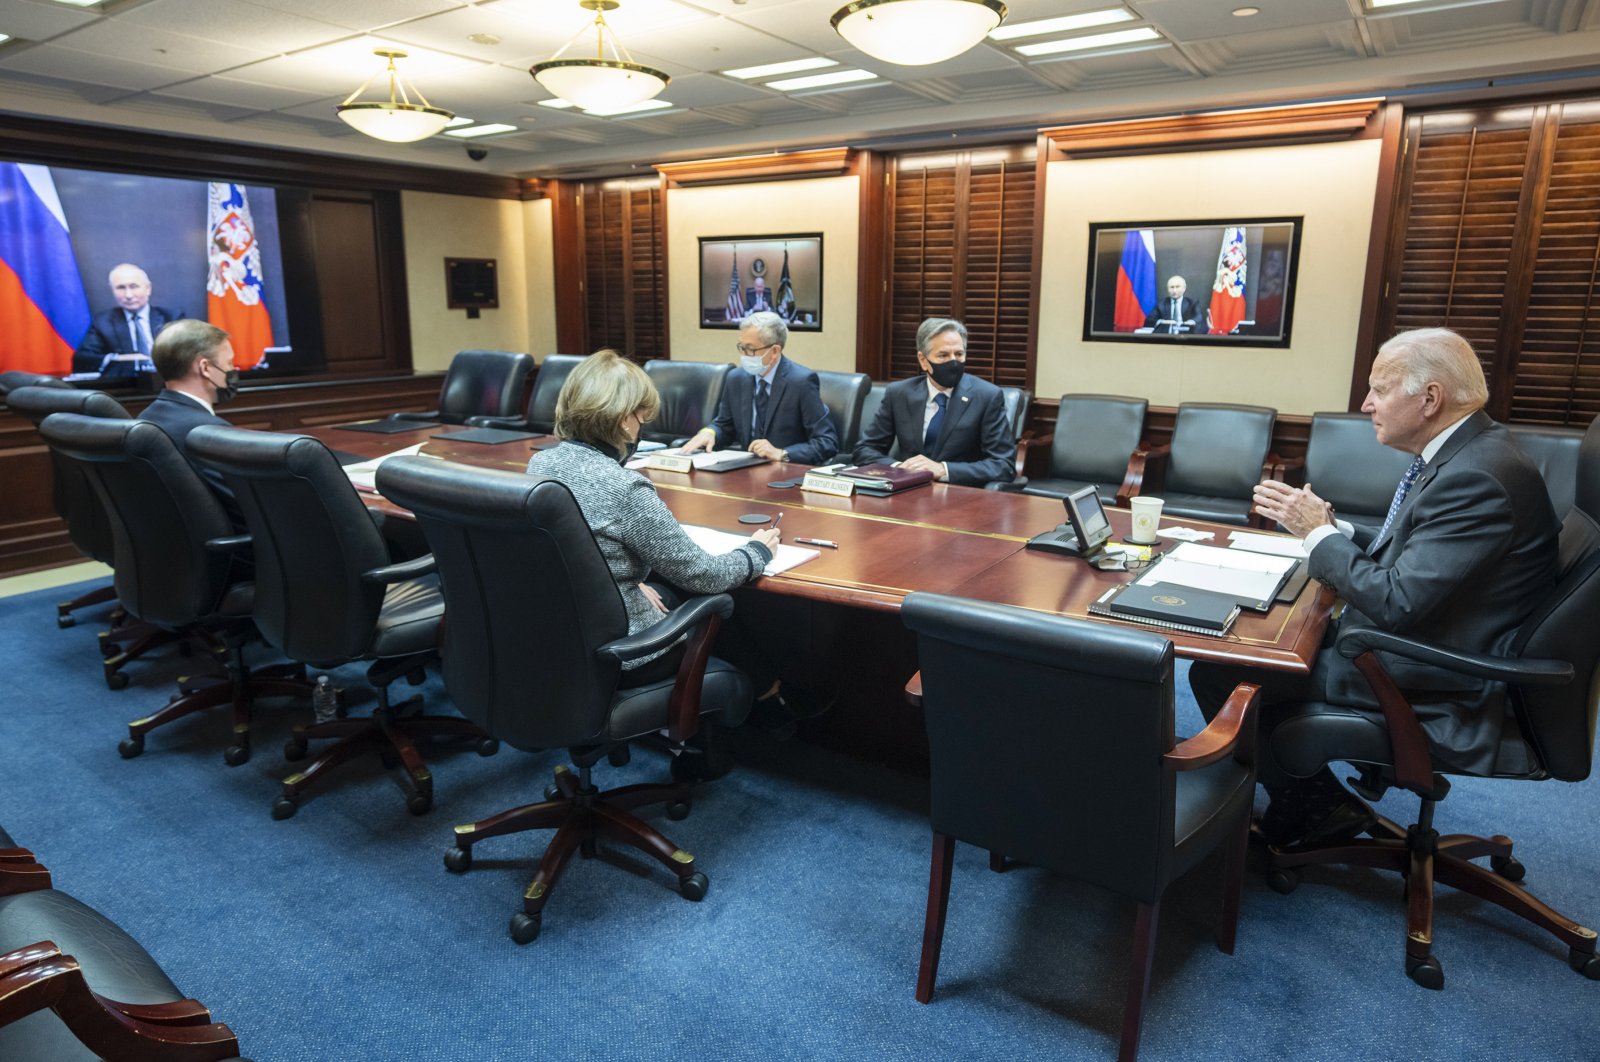 President Joe Biden (R) speaks as he virtually meets Russian President Vladimir Putin via a secured video conference from the Situation Room at the White House. Also seen are National Security Adviser Jake Sullivan (L) with Secretary of State Antony Blinken (2nd R) and National Security Council Senior Director for Russian and Central Asia, Eric Green, Washington, D.C., U.S., Dec. 7, 2021. (Photo by AP)